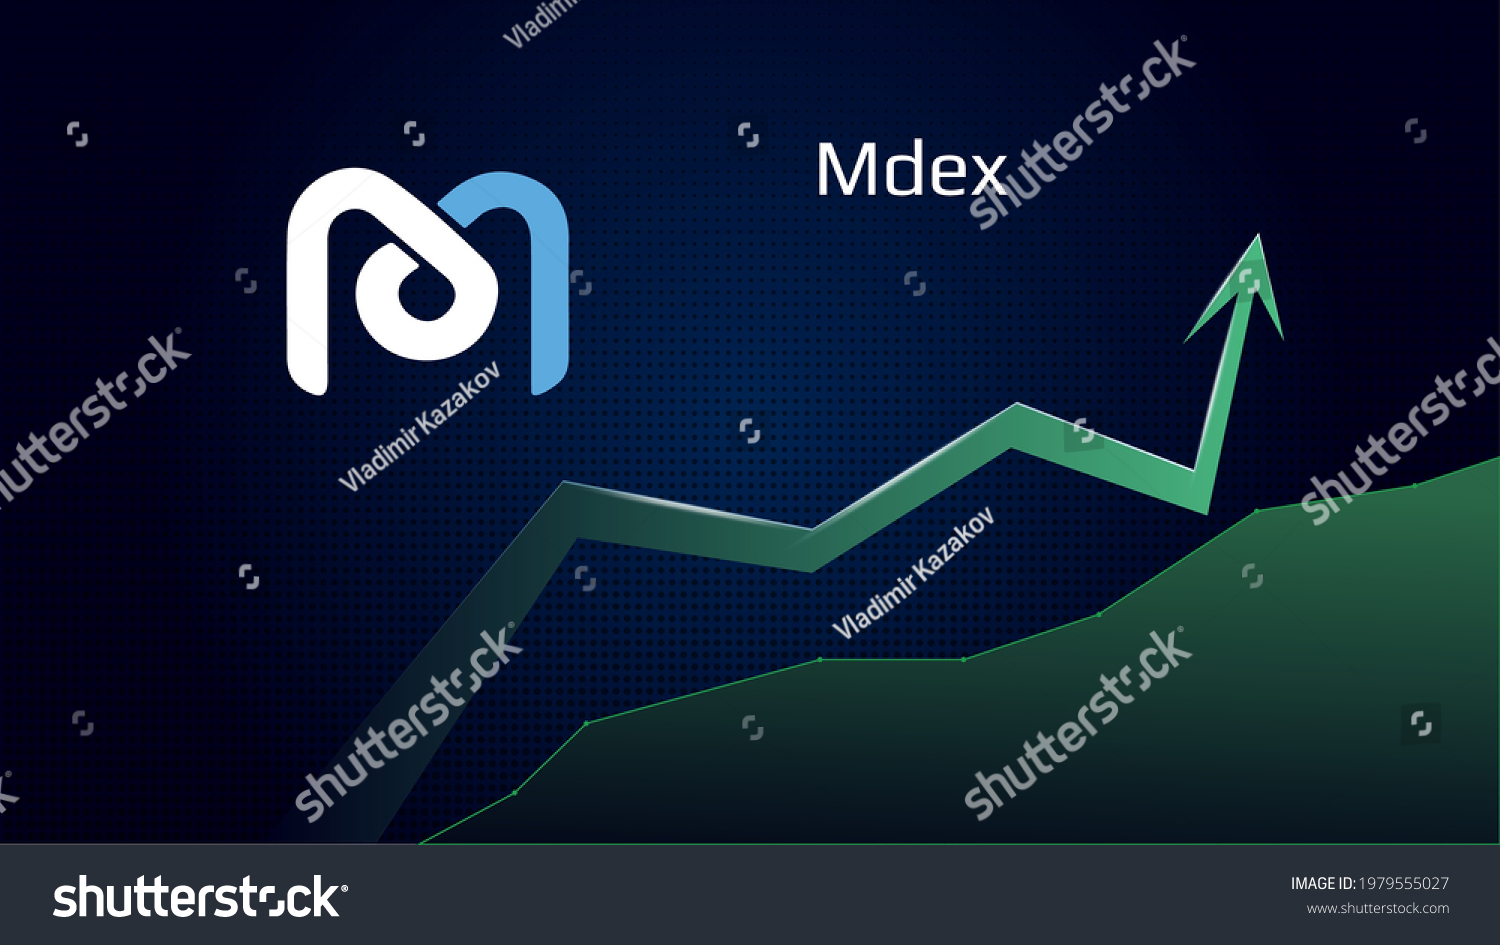 SVG of Mdex MDX in uptrend and price is rising. Cryptocurrency coin symbol and green up arrow. Uniswap flies to the moon. Vector illustration. svg